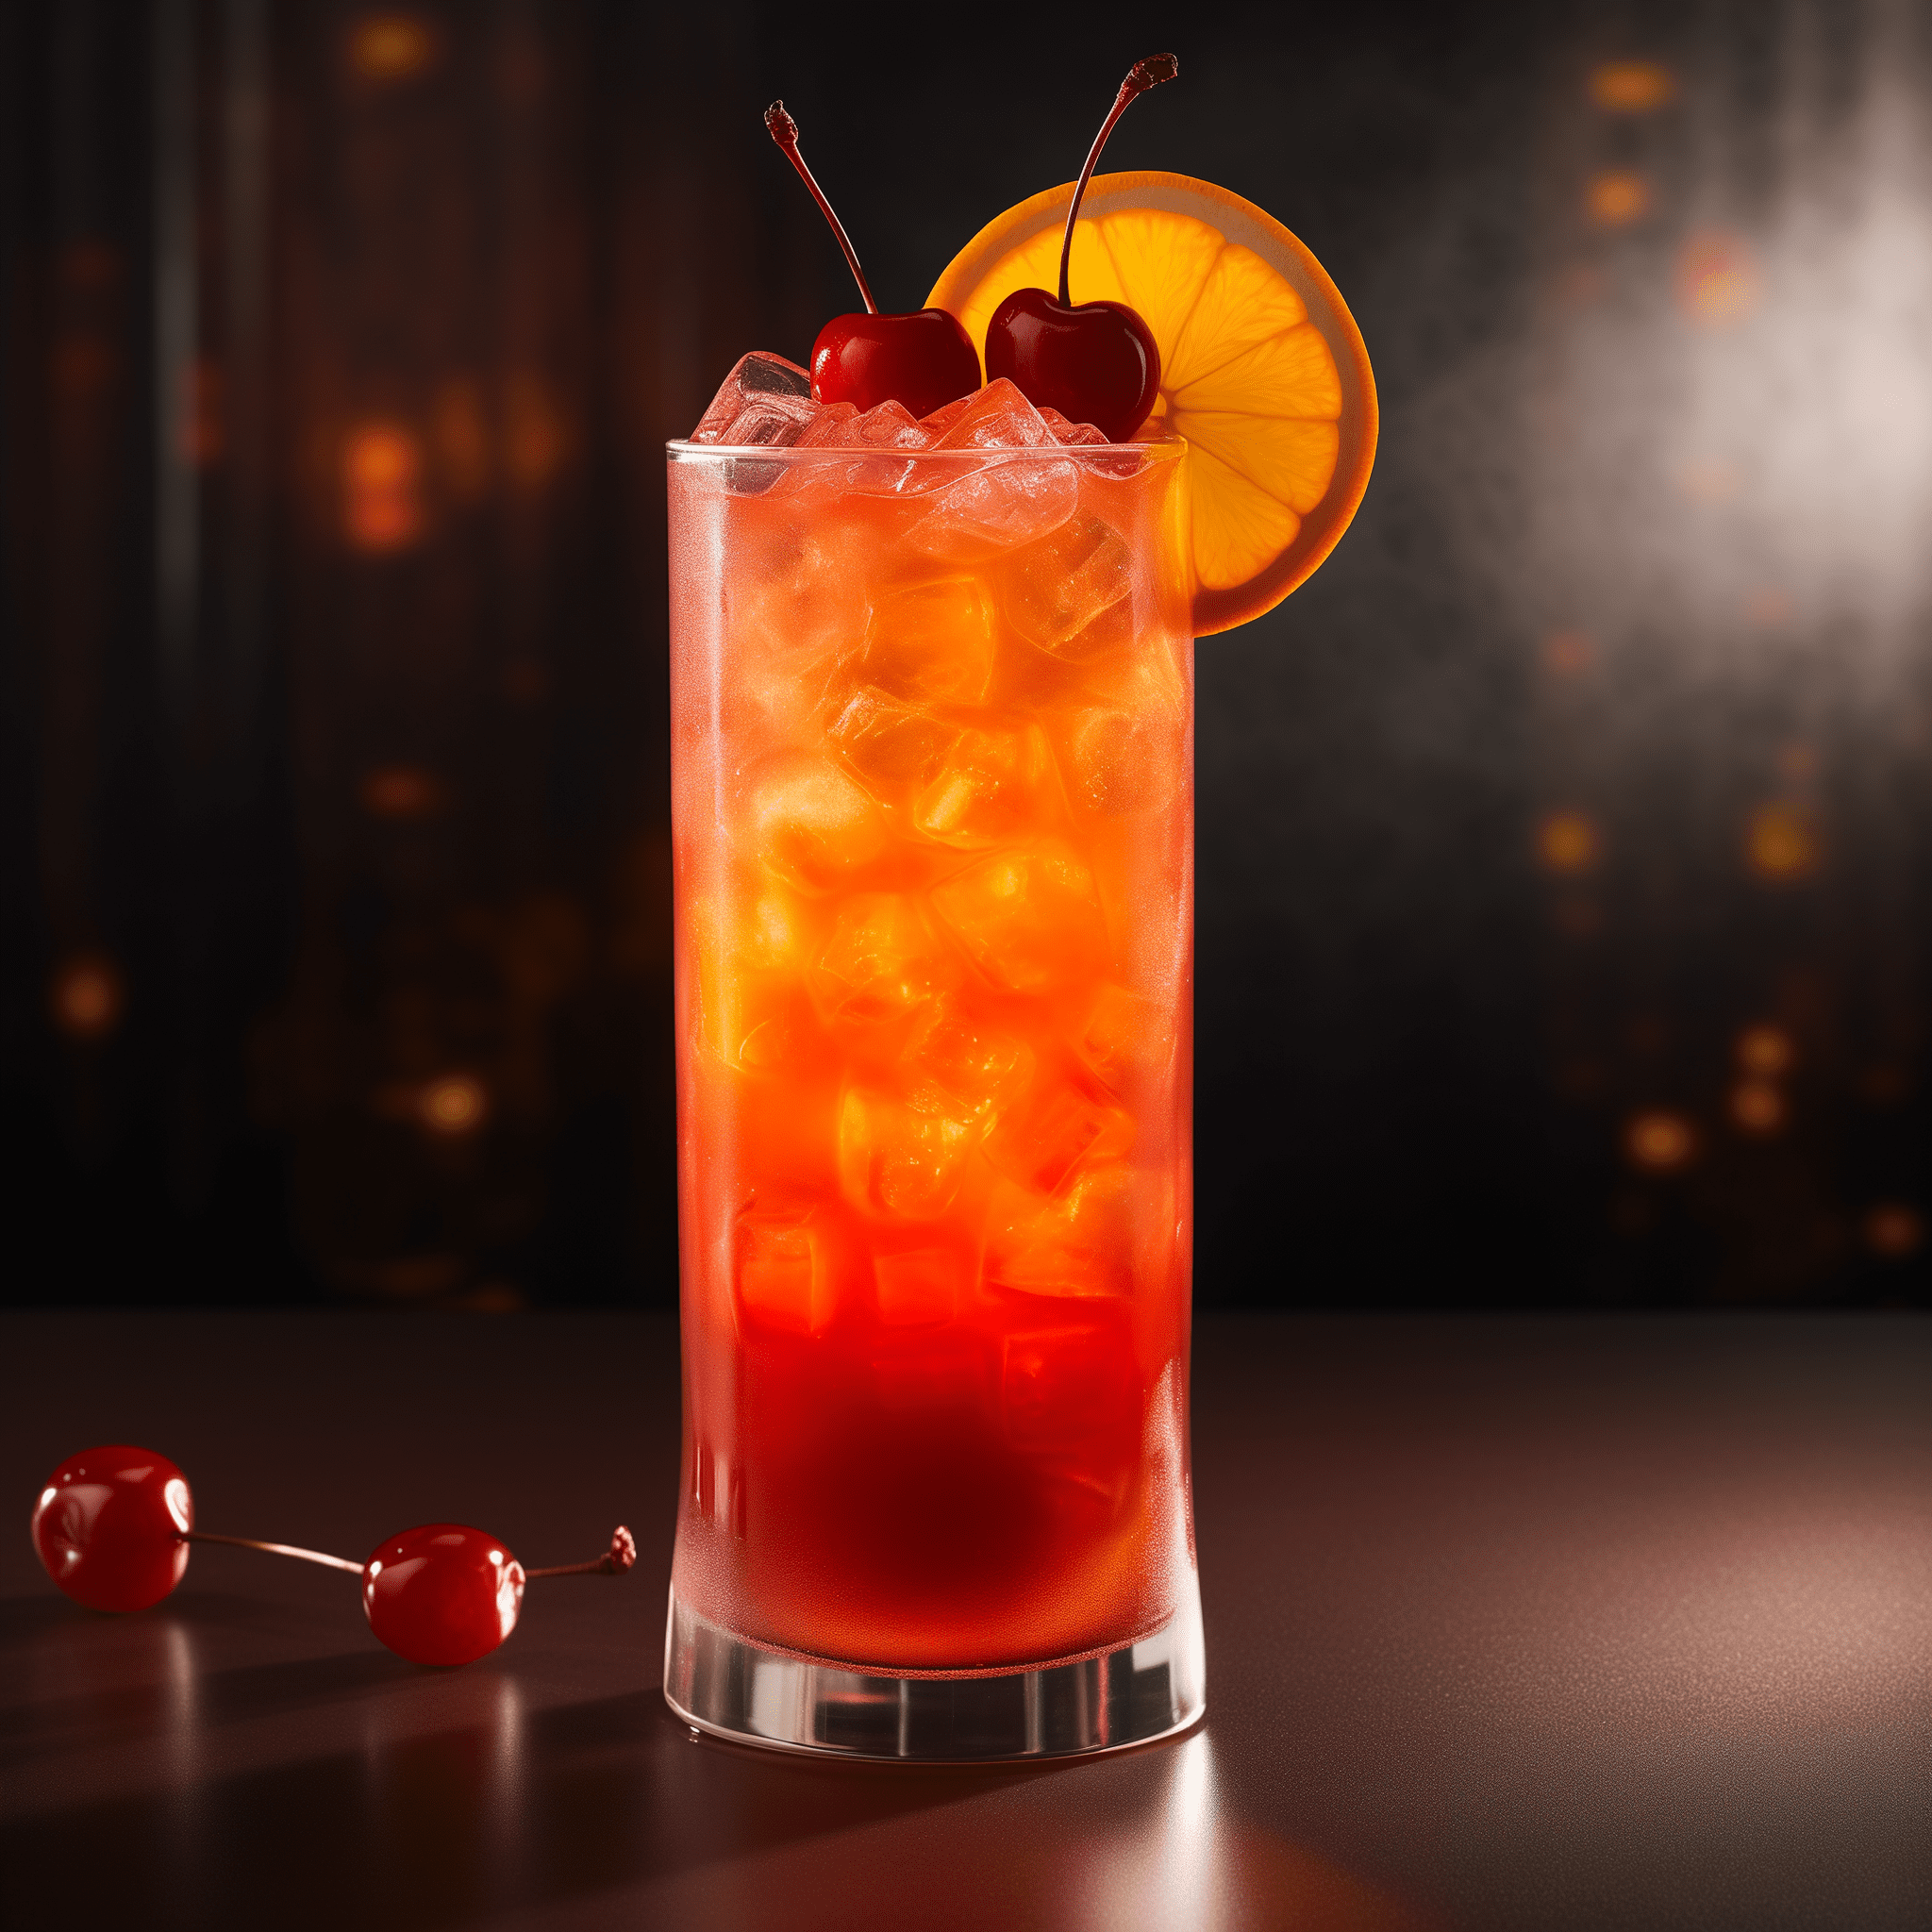 Hennessy Hurricane Cocktail Recipe - The Hennessy Hurricane offers a harmonious blend of sweet and fruity flavors with a robust cognac foundation. It's rich, bold, and has a tropical flair, with a warming finish that lingers on the palate.